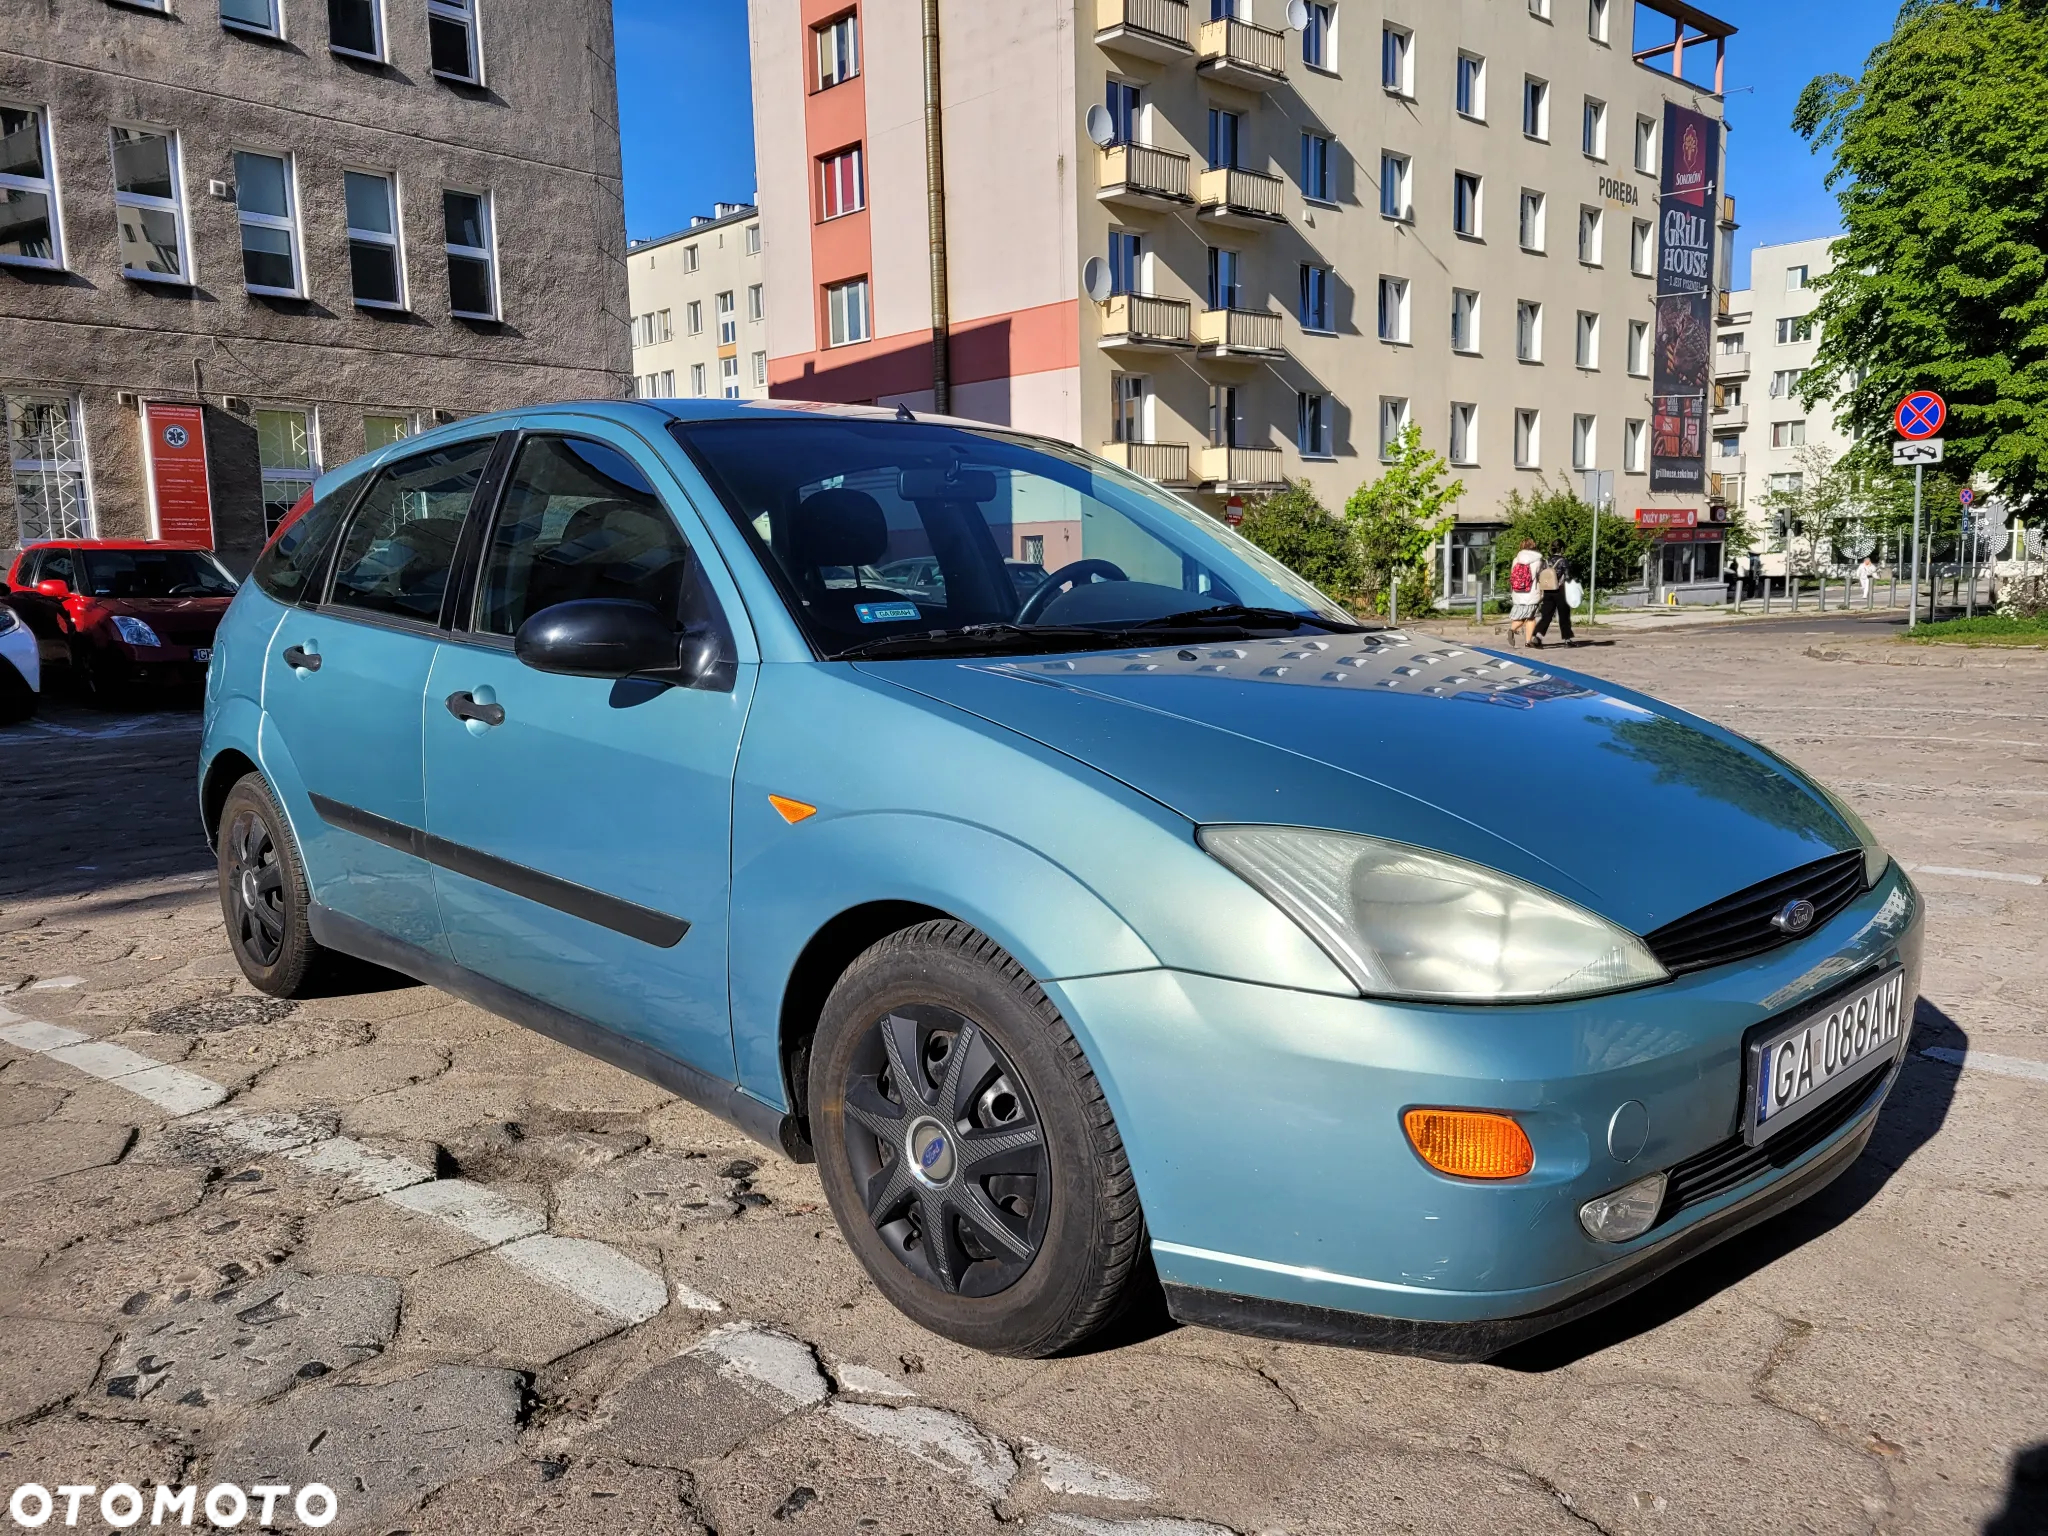 Ford Focus 1.8 Trend - 2